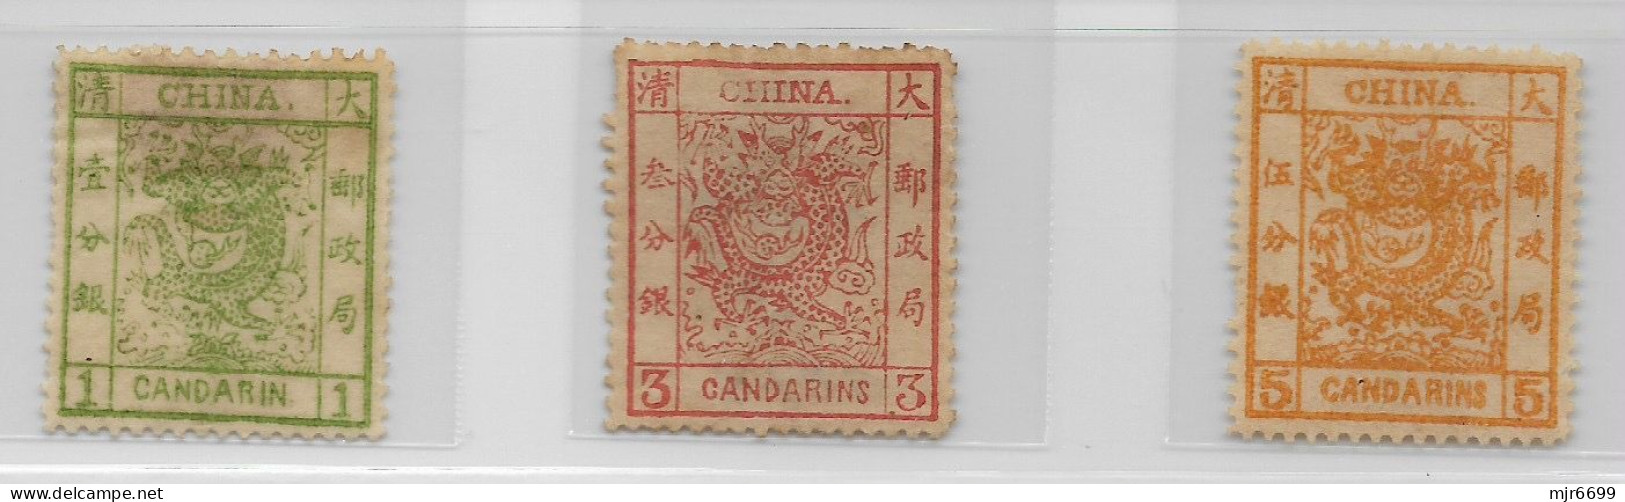 CHINA LARGE DRAGON 1, 3 & 5 CAND, MINT, LOOK AT THE PHOTO, BEFORE BID. - Unused Stamps